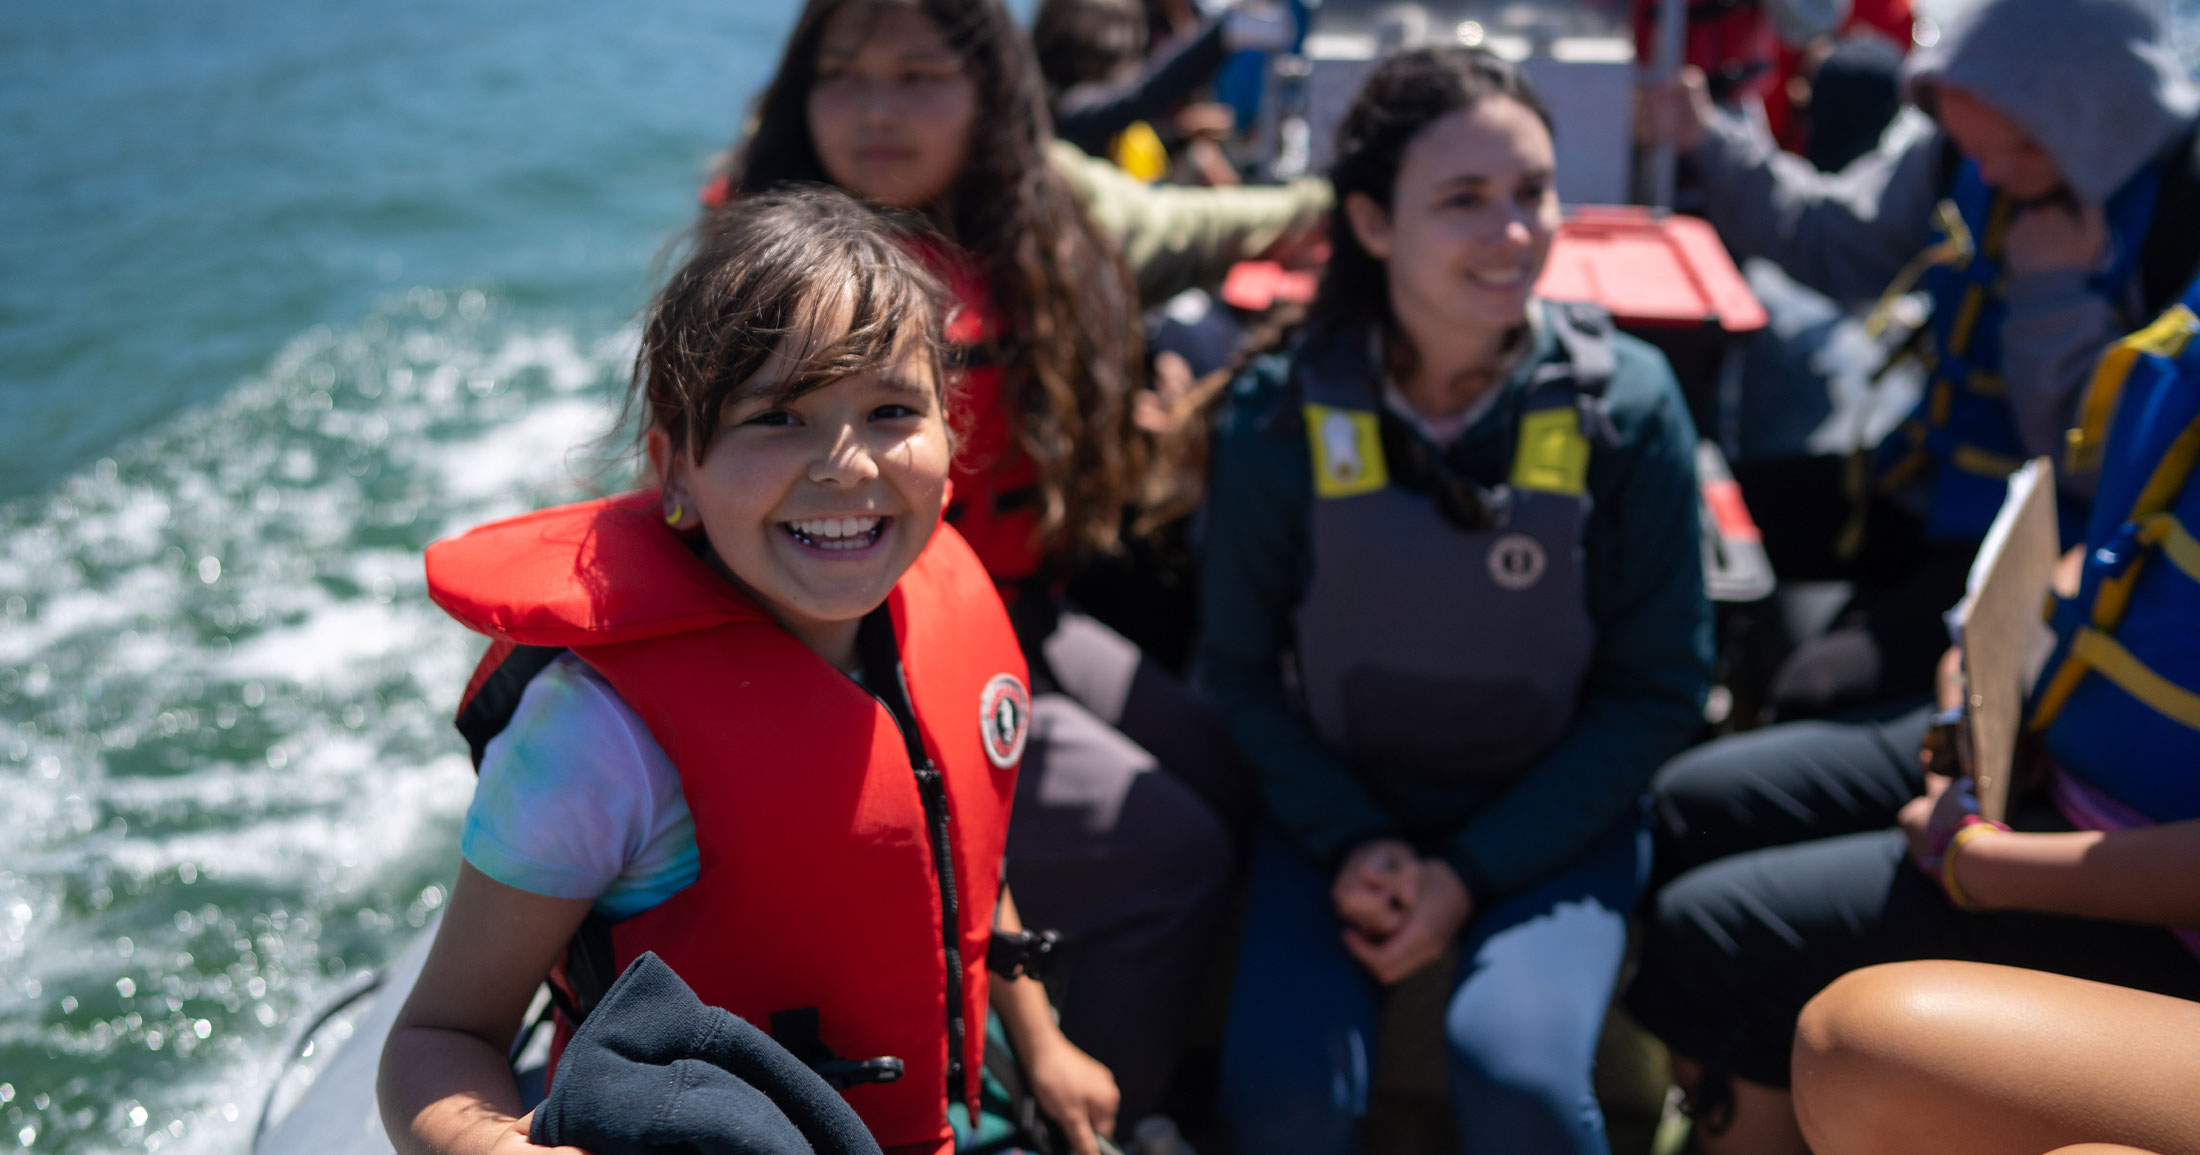 Youth on a zodiac wearing life jackets and smiling.